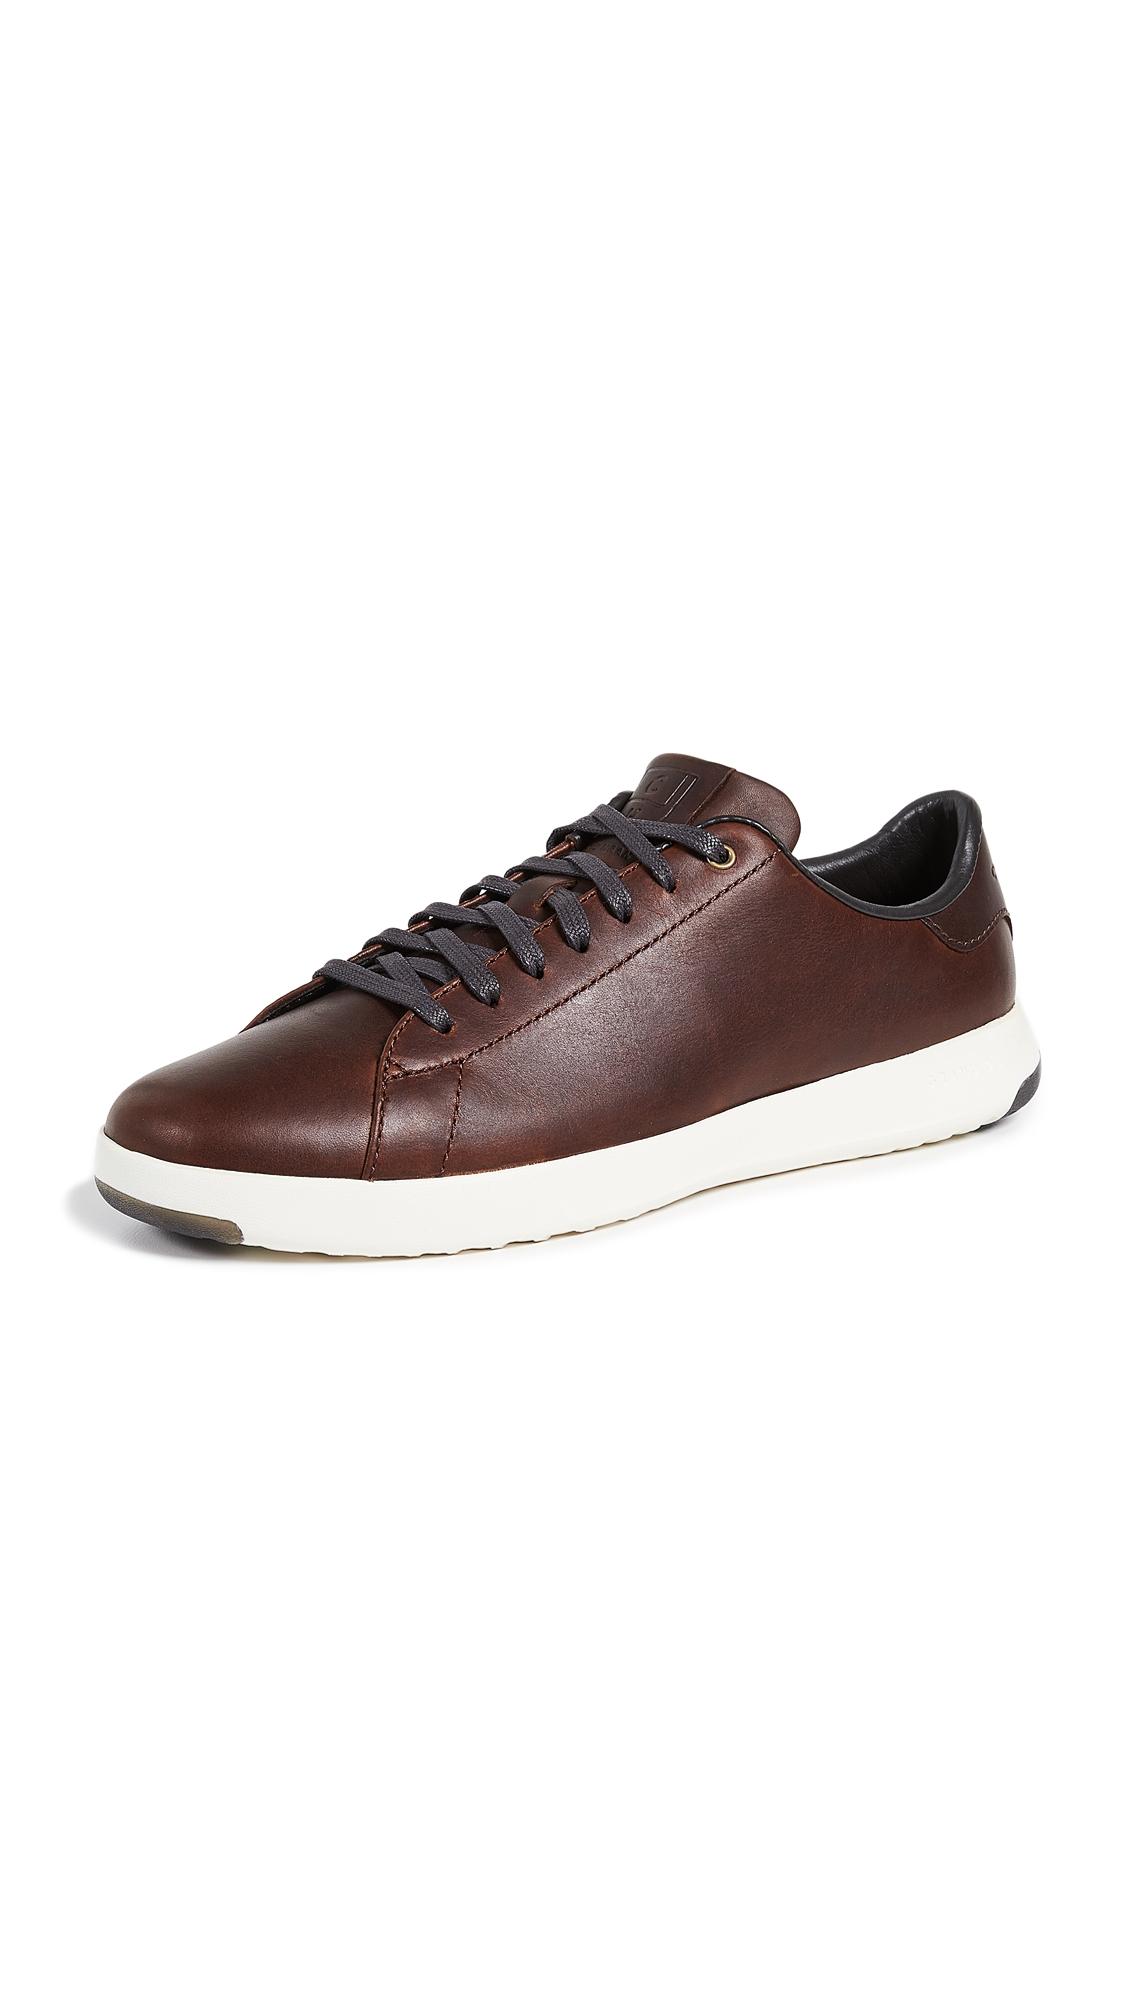 cole haan grandpro leather sneakers